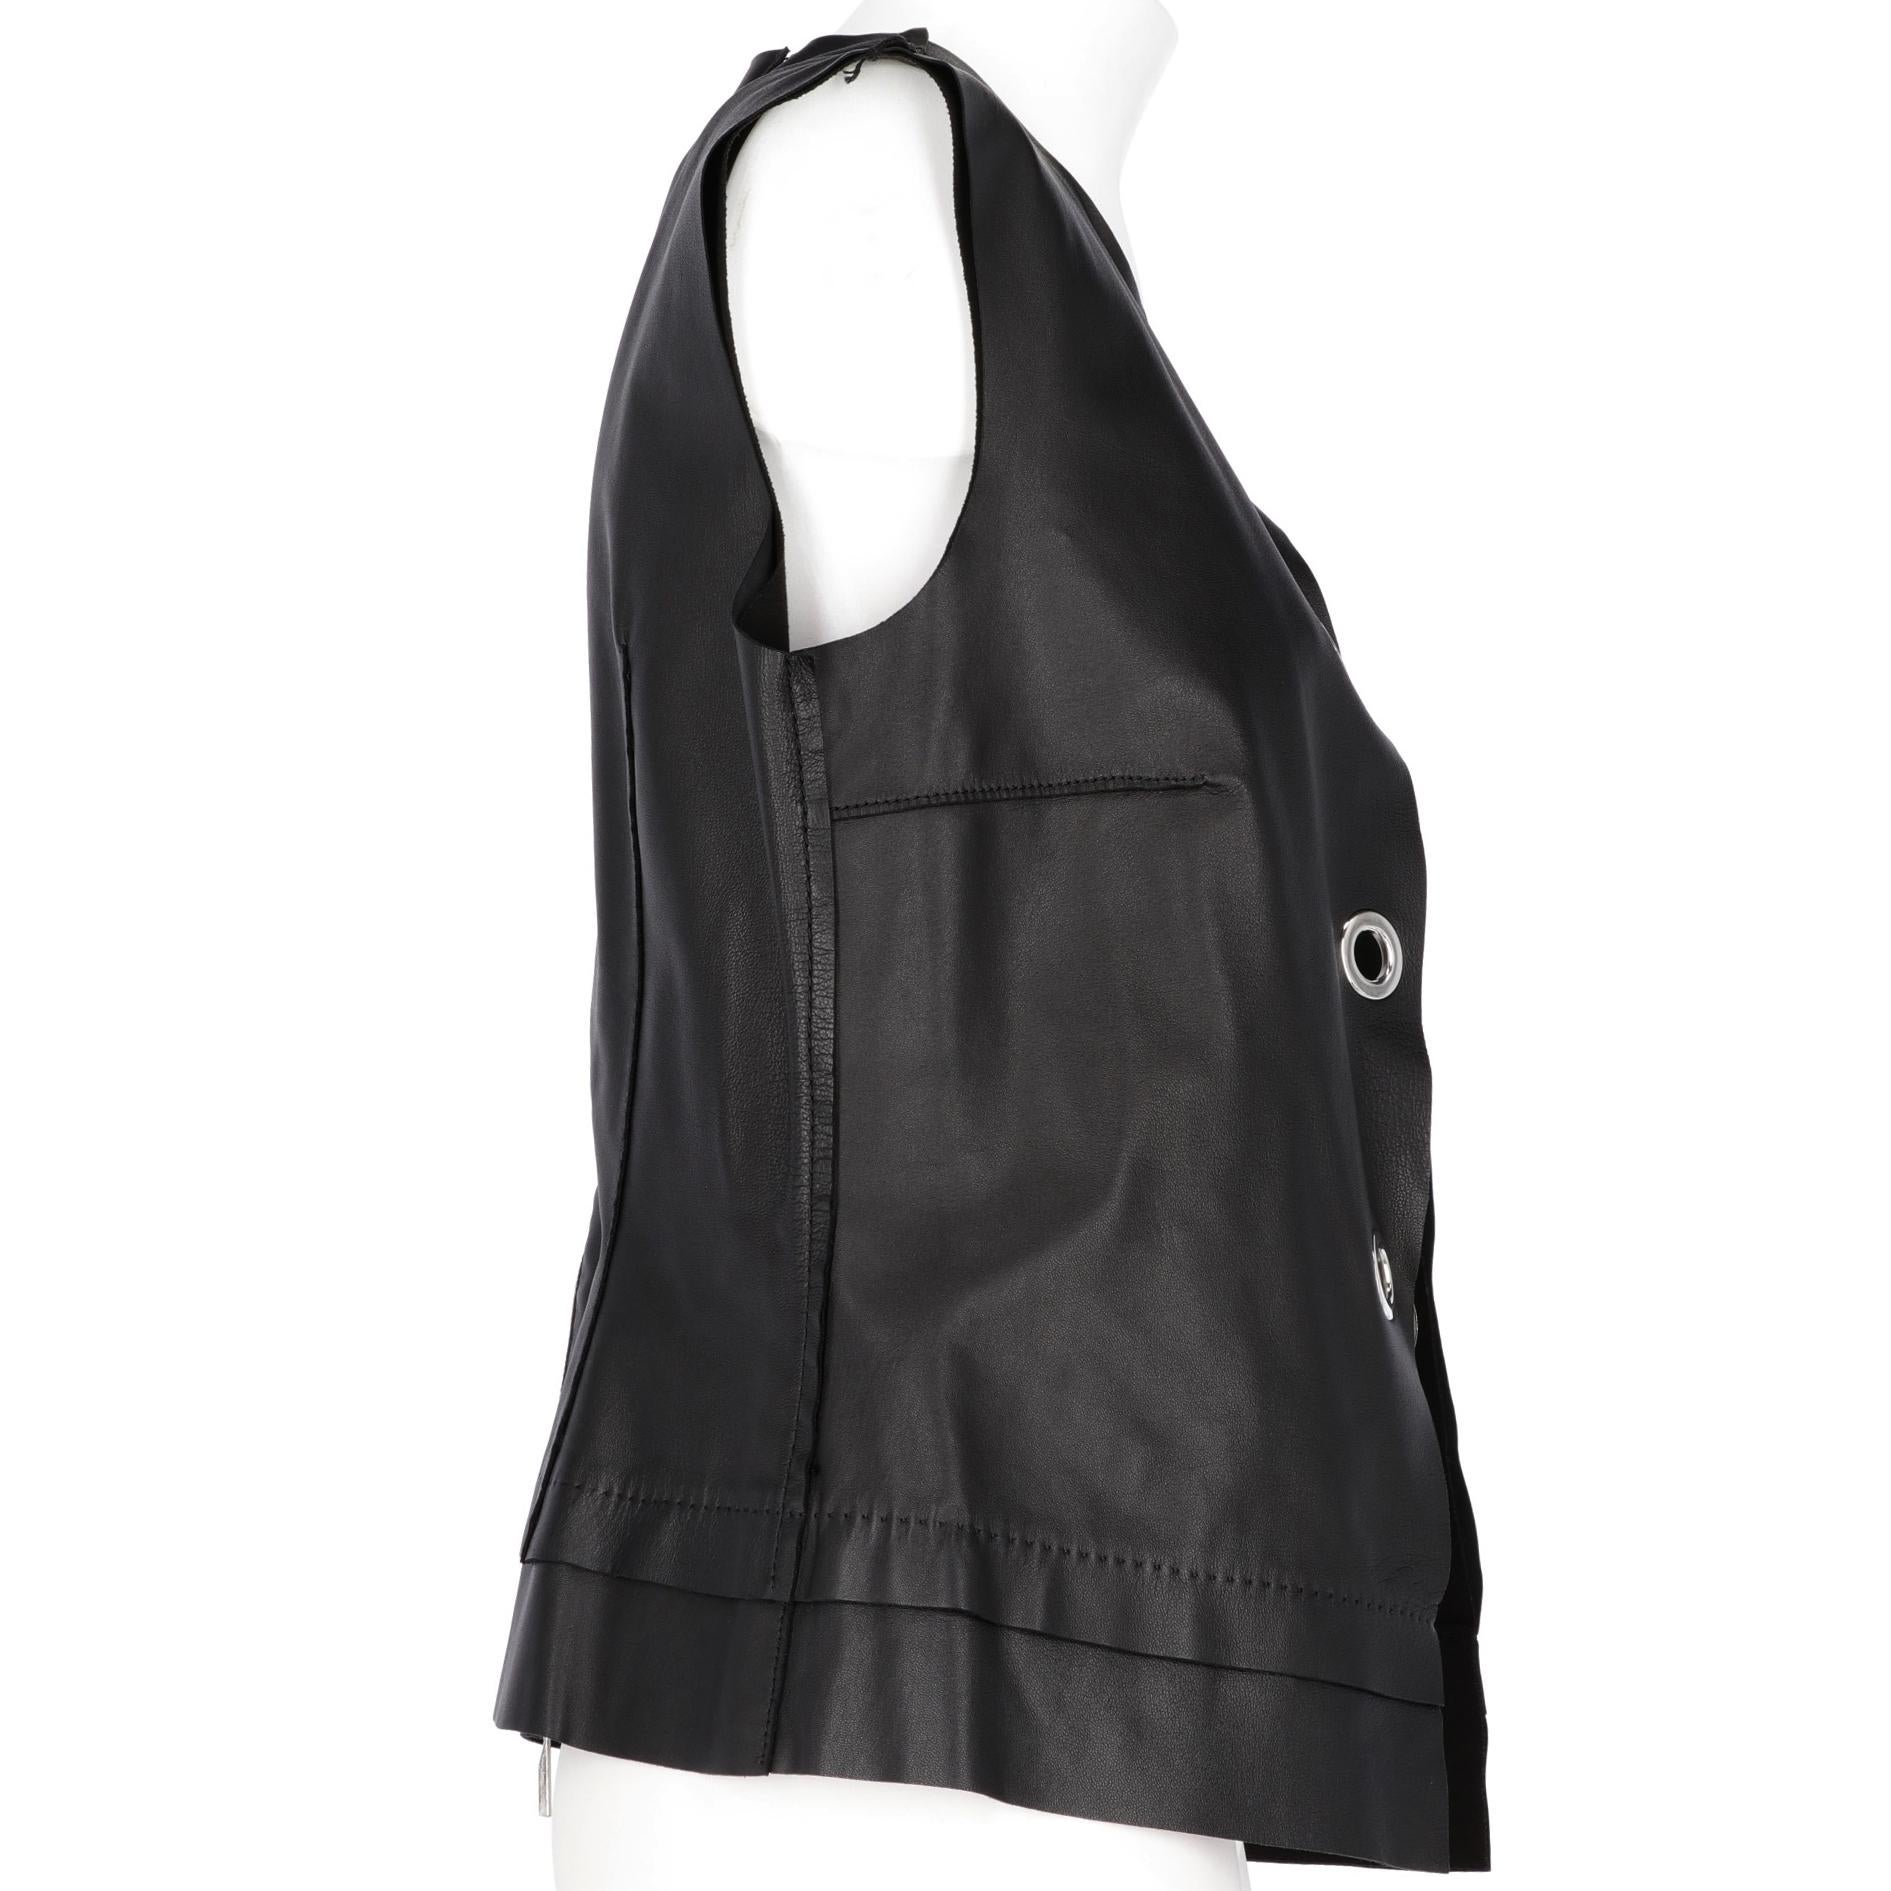 The stylish Costume National black leather vest features silver-tone metal decorative buckles on the front and a decorative zip at back. With raw cut edges and visible stitchings, the vest is lined and in perfect conditions.

Years: 1990s
Made in